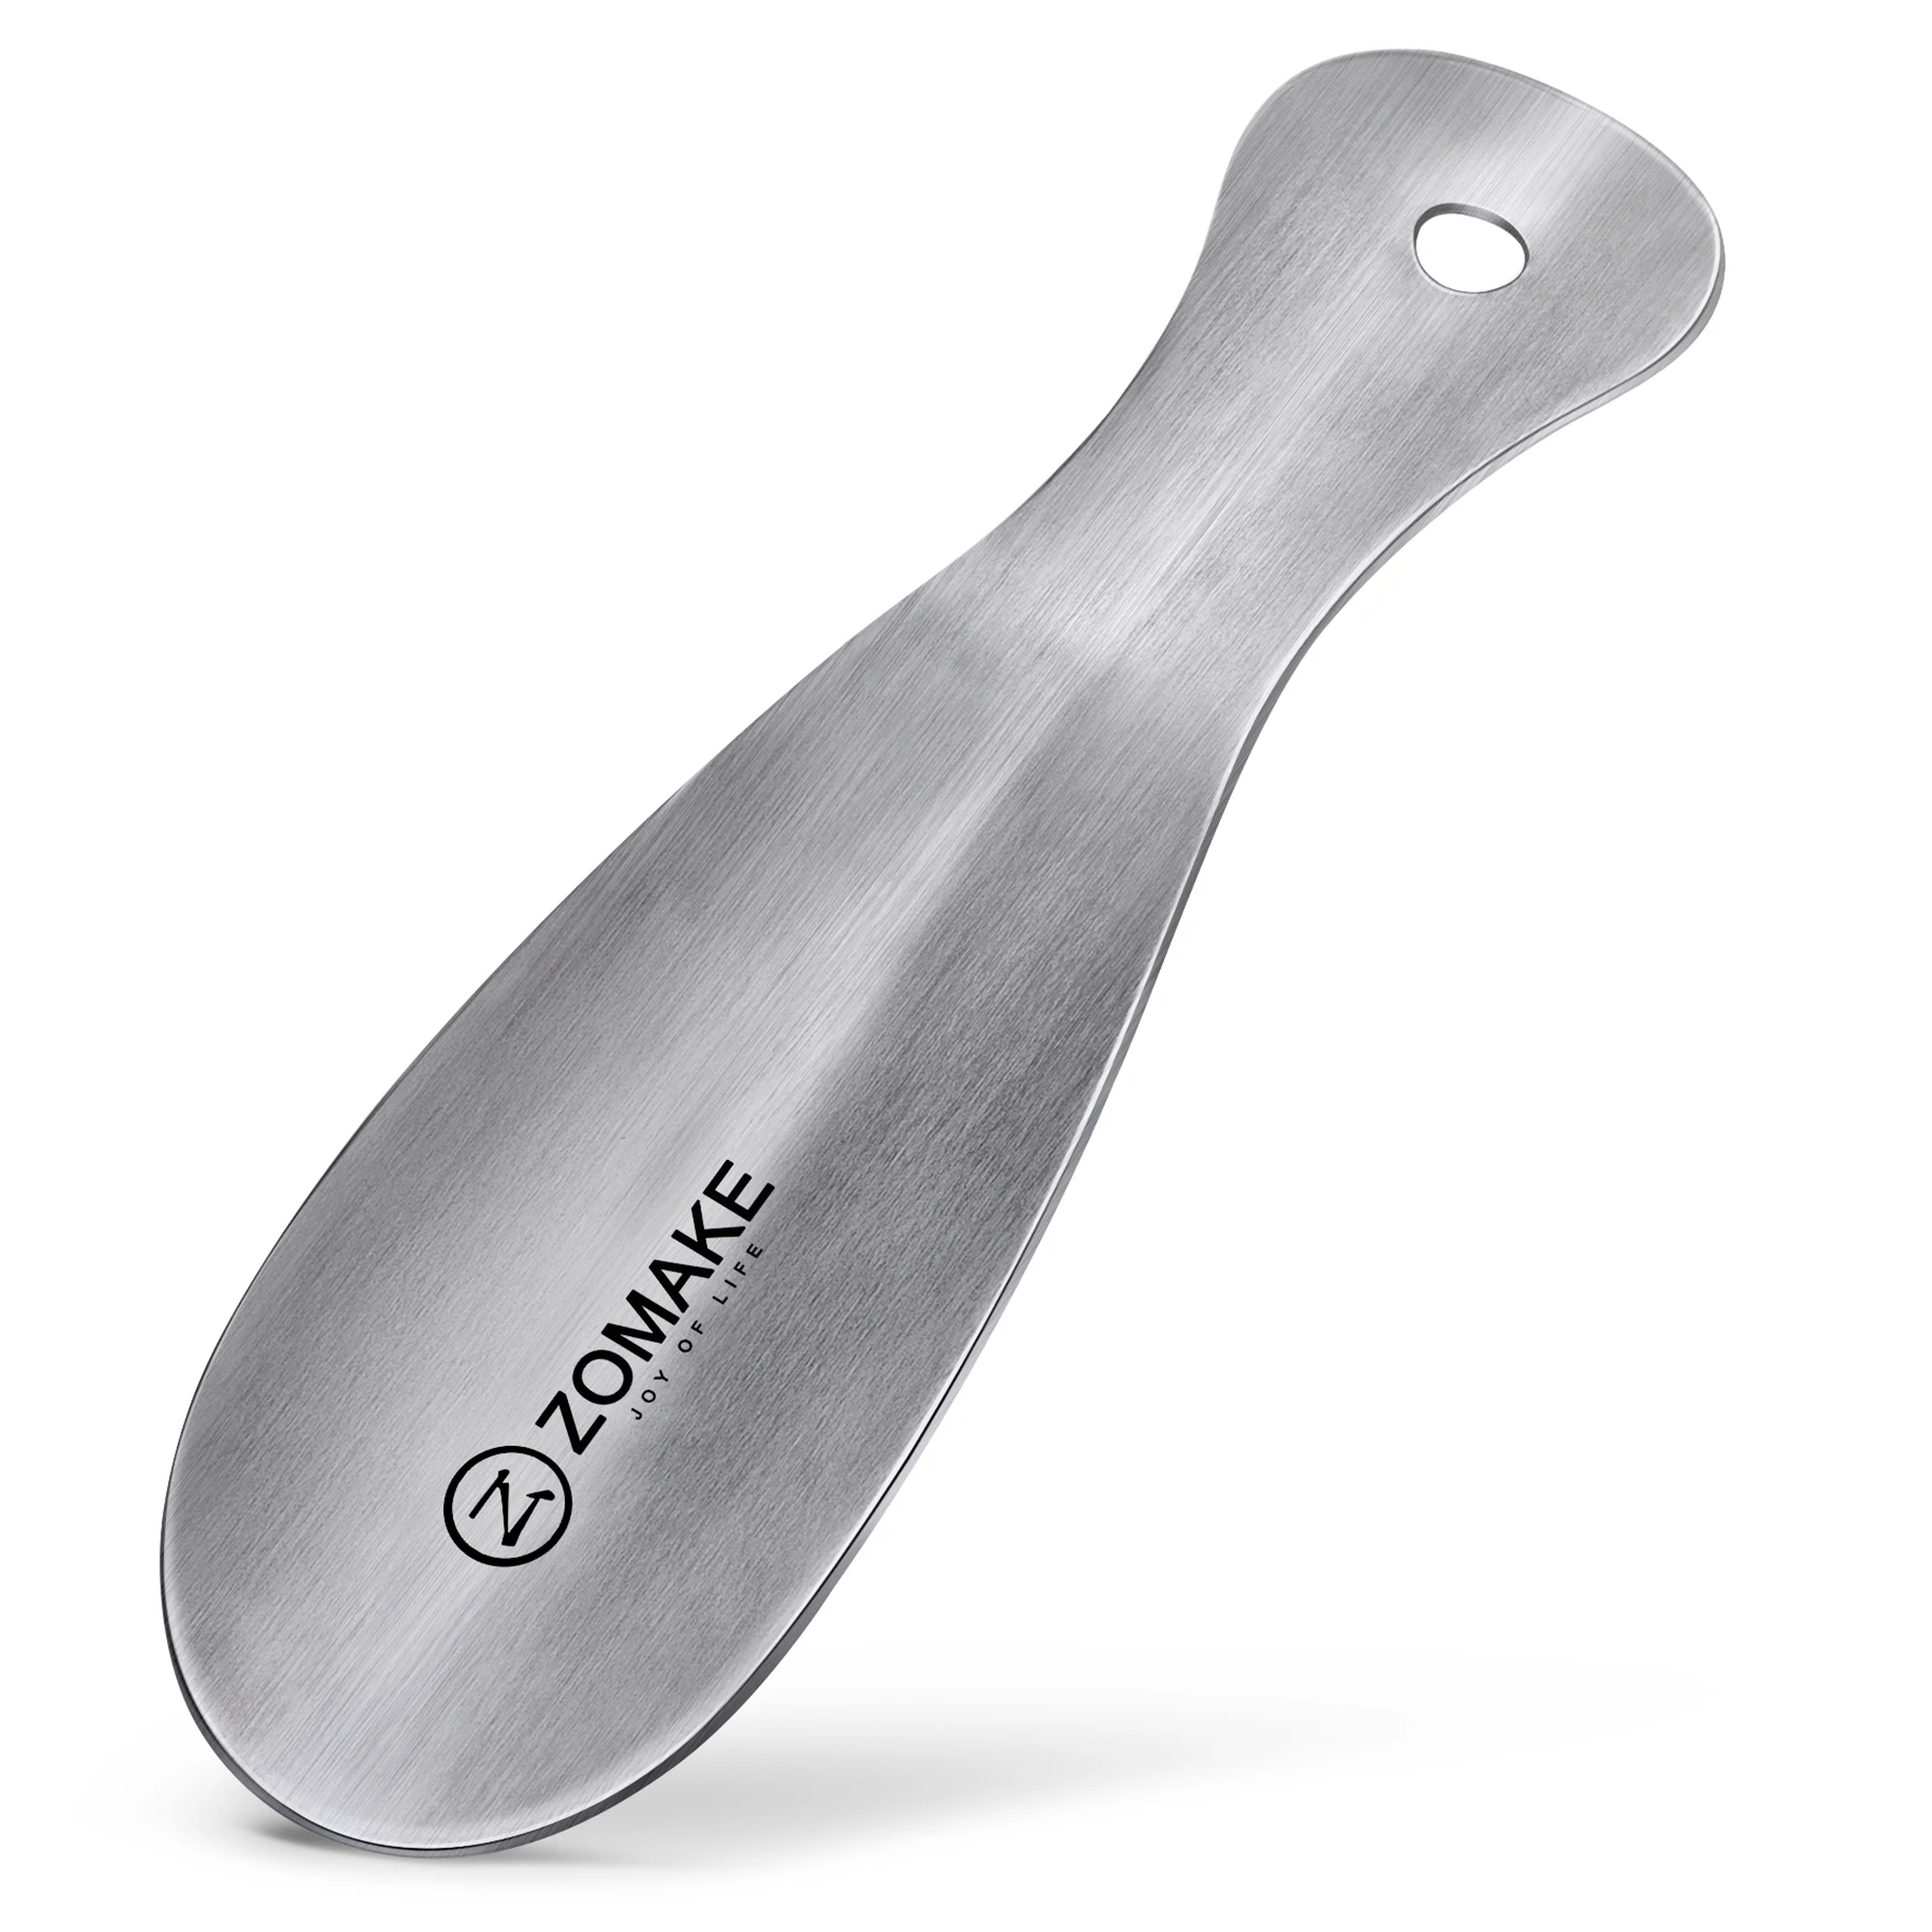 Small ShoeHorn Stainless Steel with Hole 7.5Inch Shoe Spoon Wear Shoe Helper Easy Carry Aid Tool Accessories for Unisex